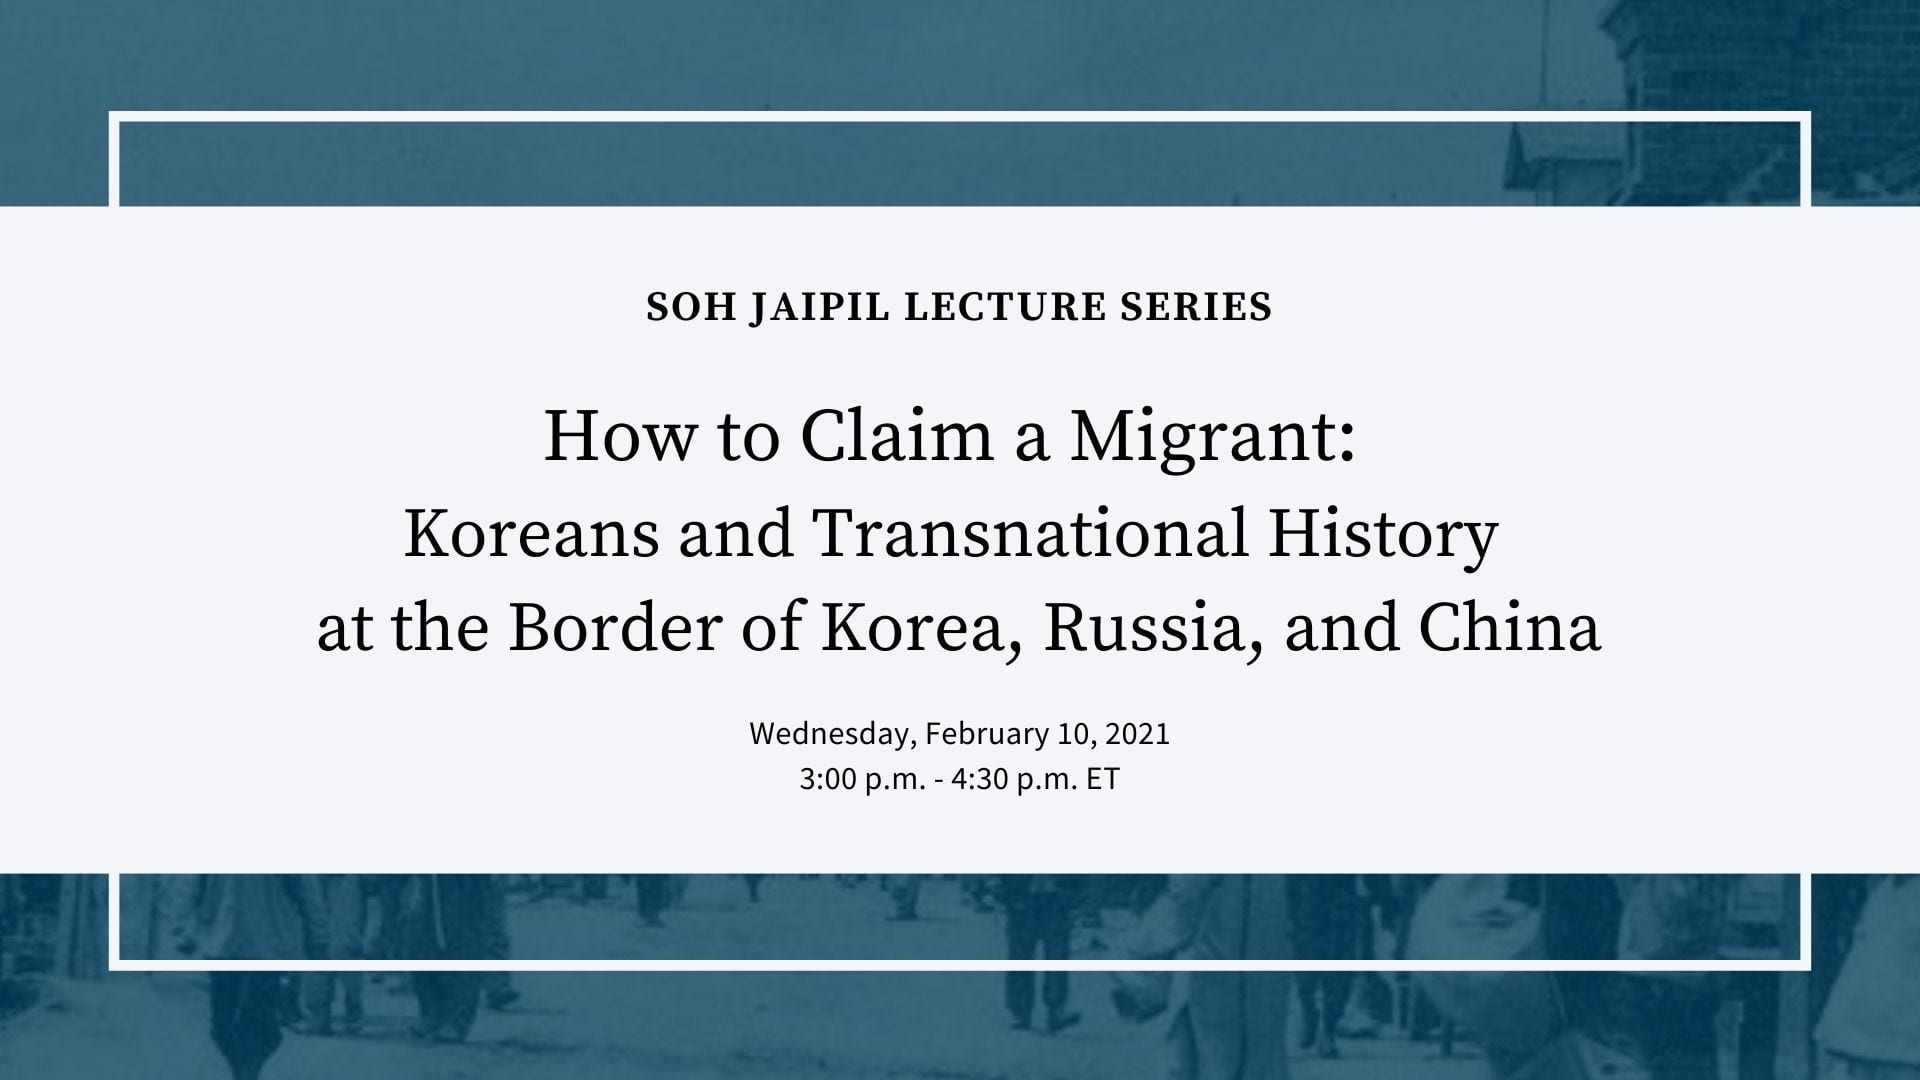 banner for event with blue background and white overlay; text: Soh Jaipil Lecture Series “How to Claim a Migrant: Koreans and Transnational History at the Border of Korea, Russia, and China“